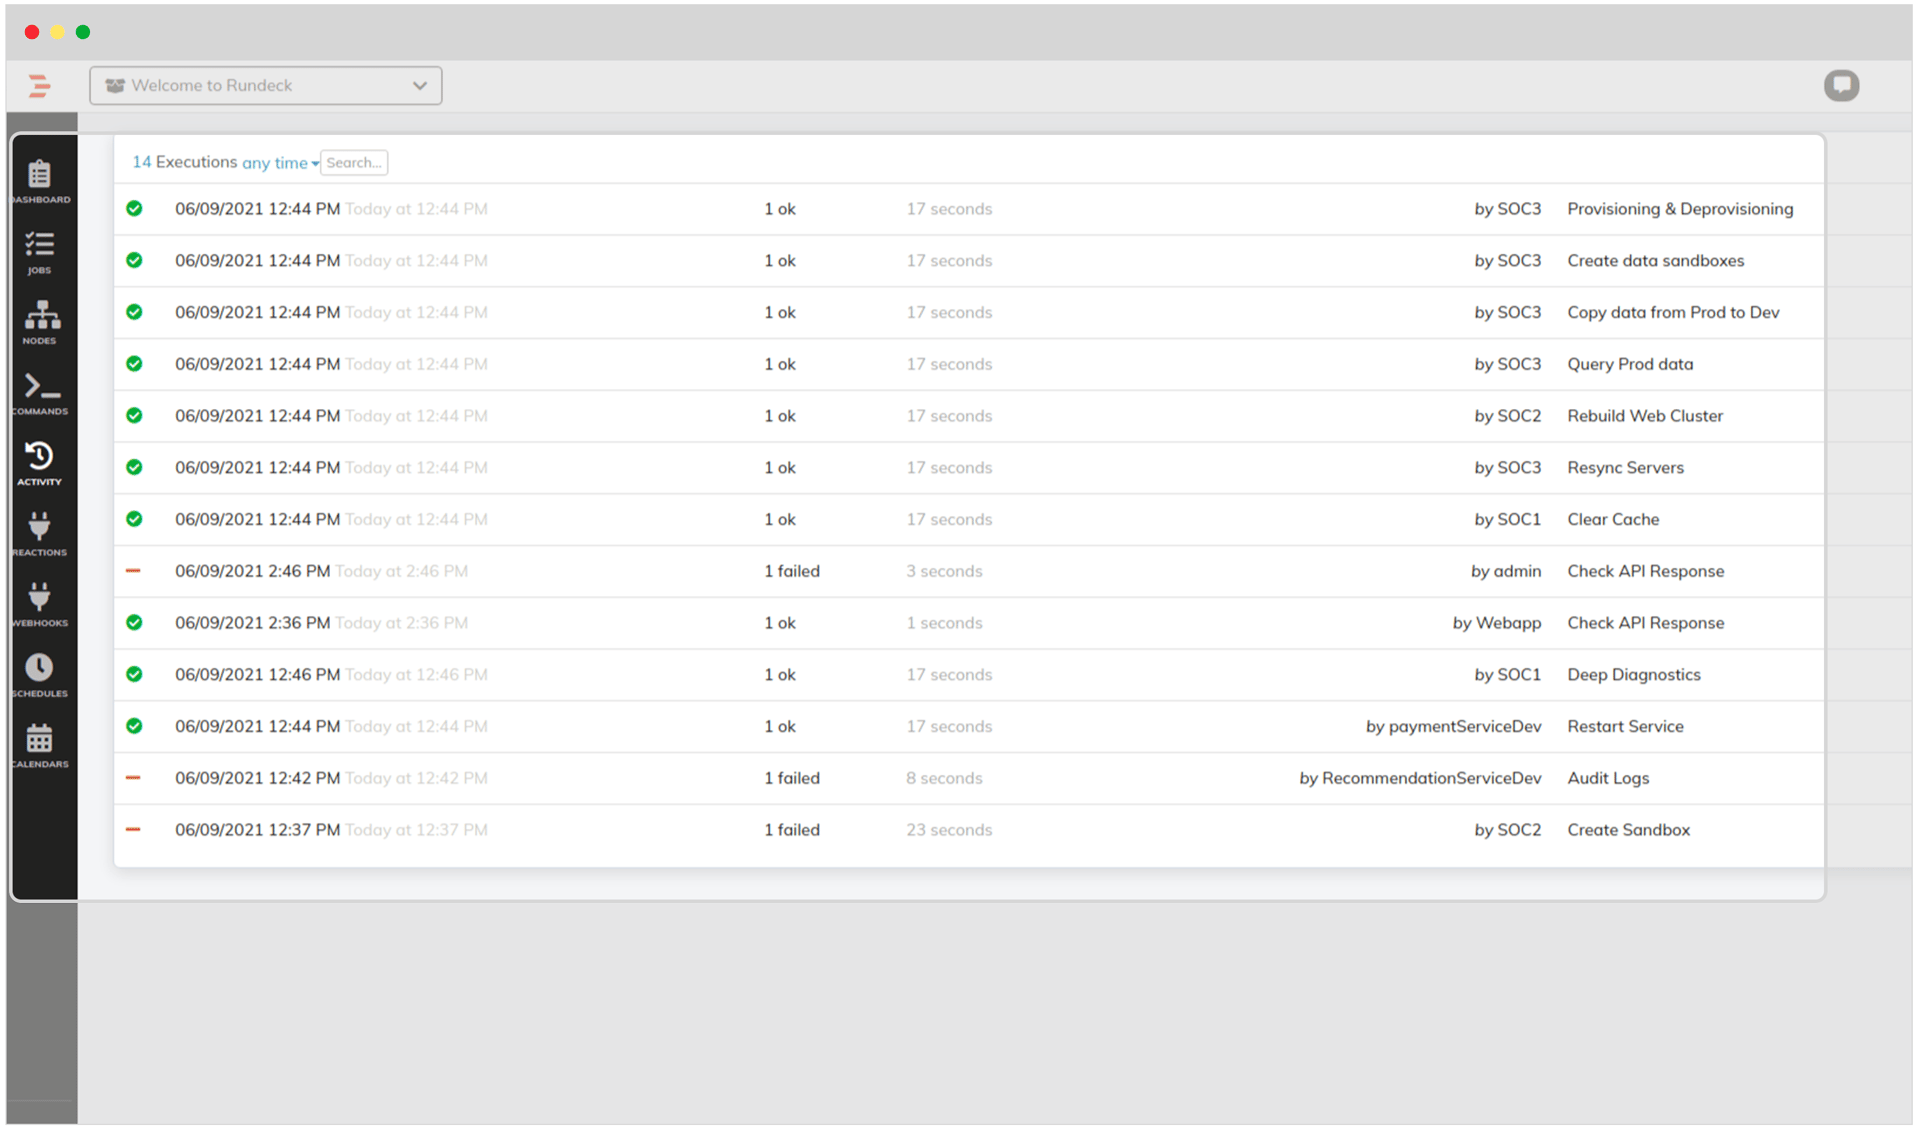 Screenshot showing log of prior workflow runs by Rundeck users to provide an audit trail.